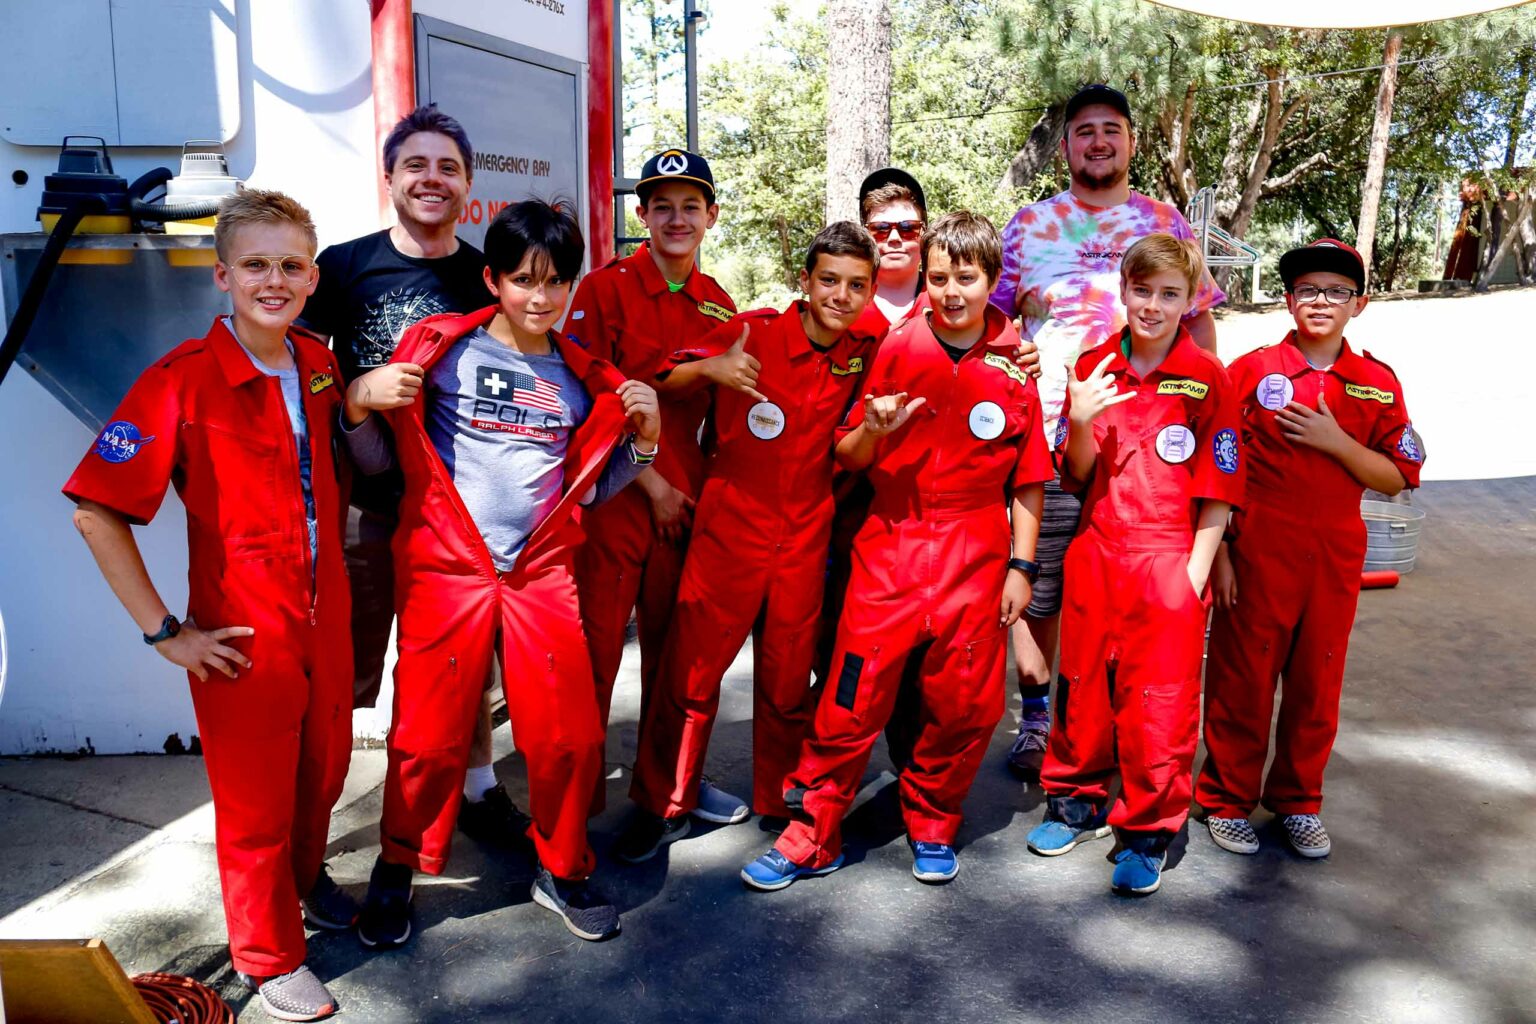 Boys posing in red jumpsuits.